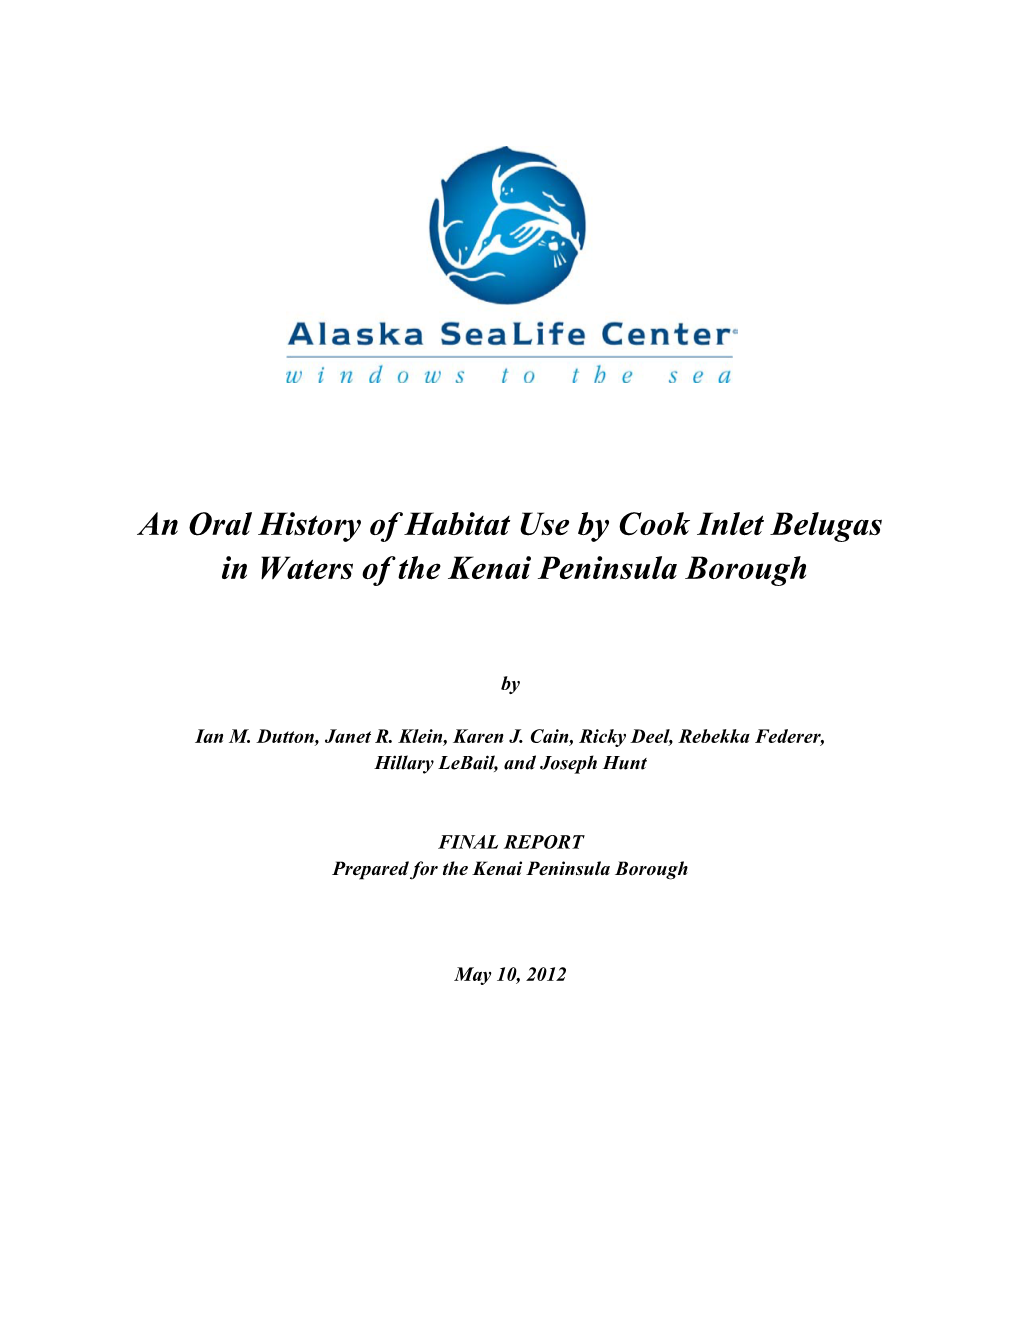 An Oral History of Habitat Use by Cook Inlet Belugas in Waters of the Kenai Peninsula Borough